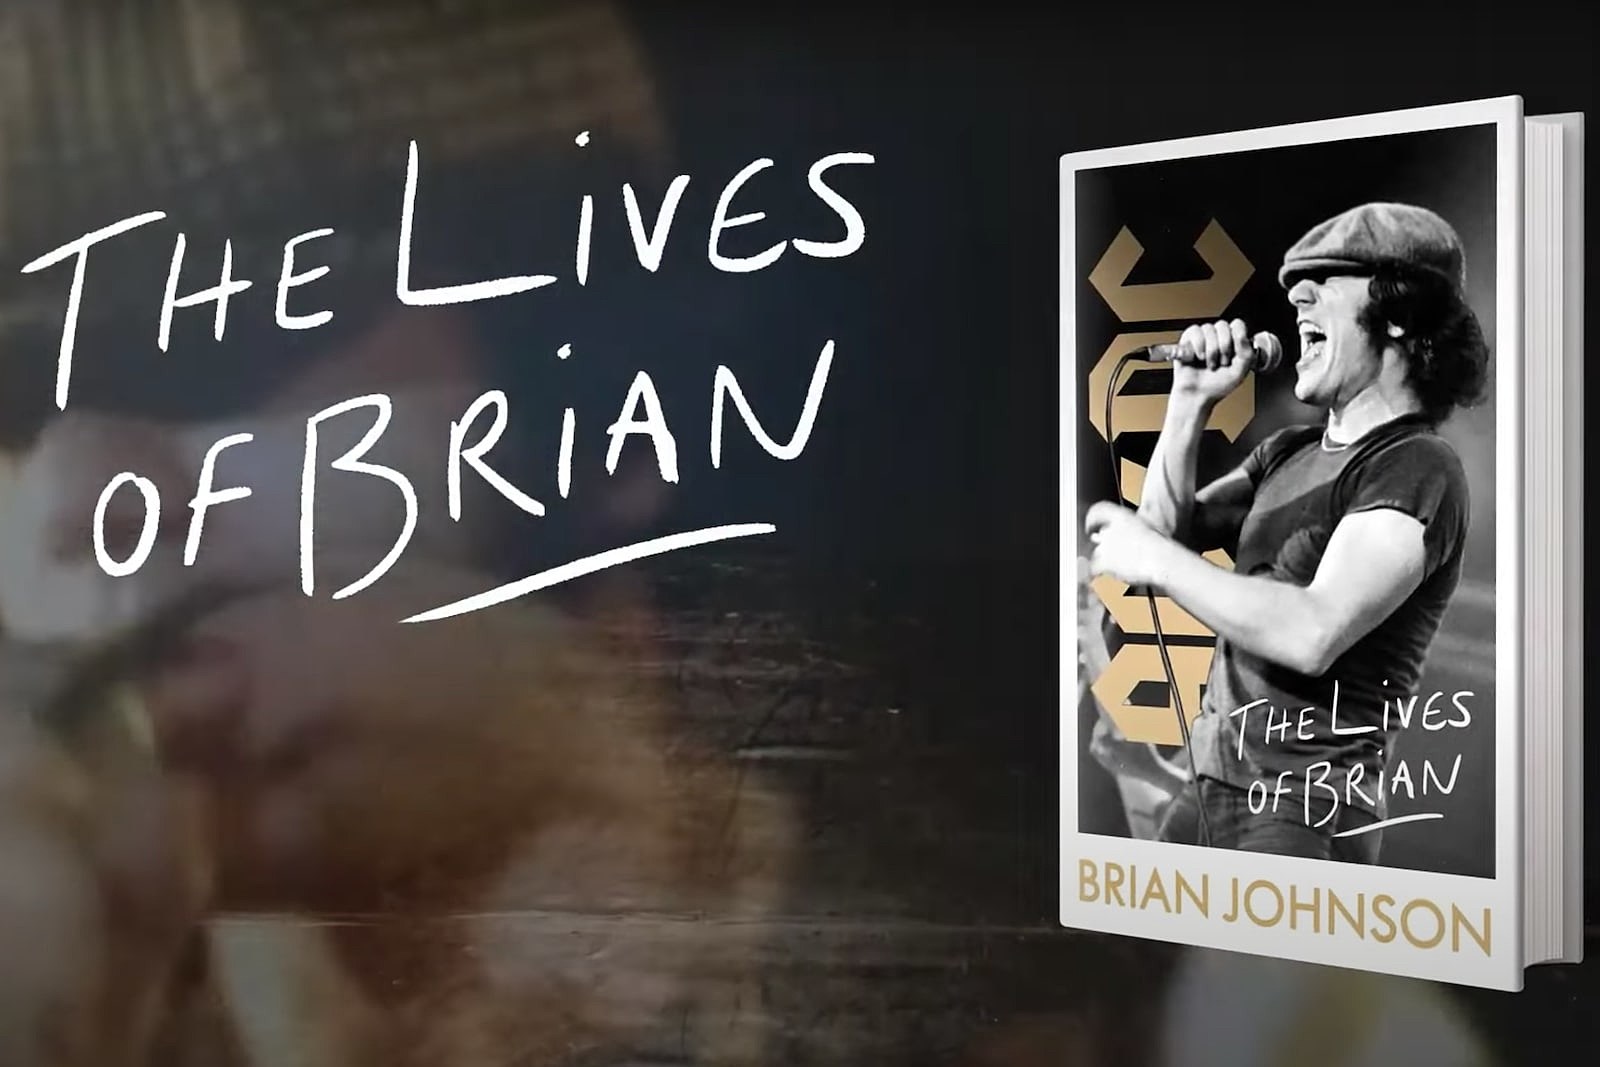 Lives-of-Brian-ACDC-Brian-Johnson-YouTube-Image